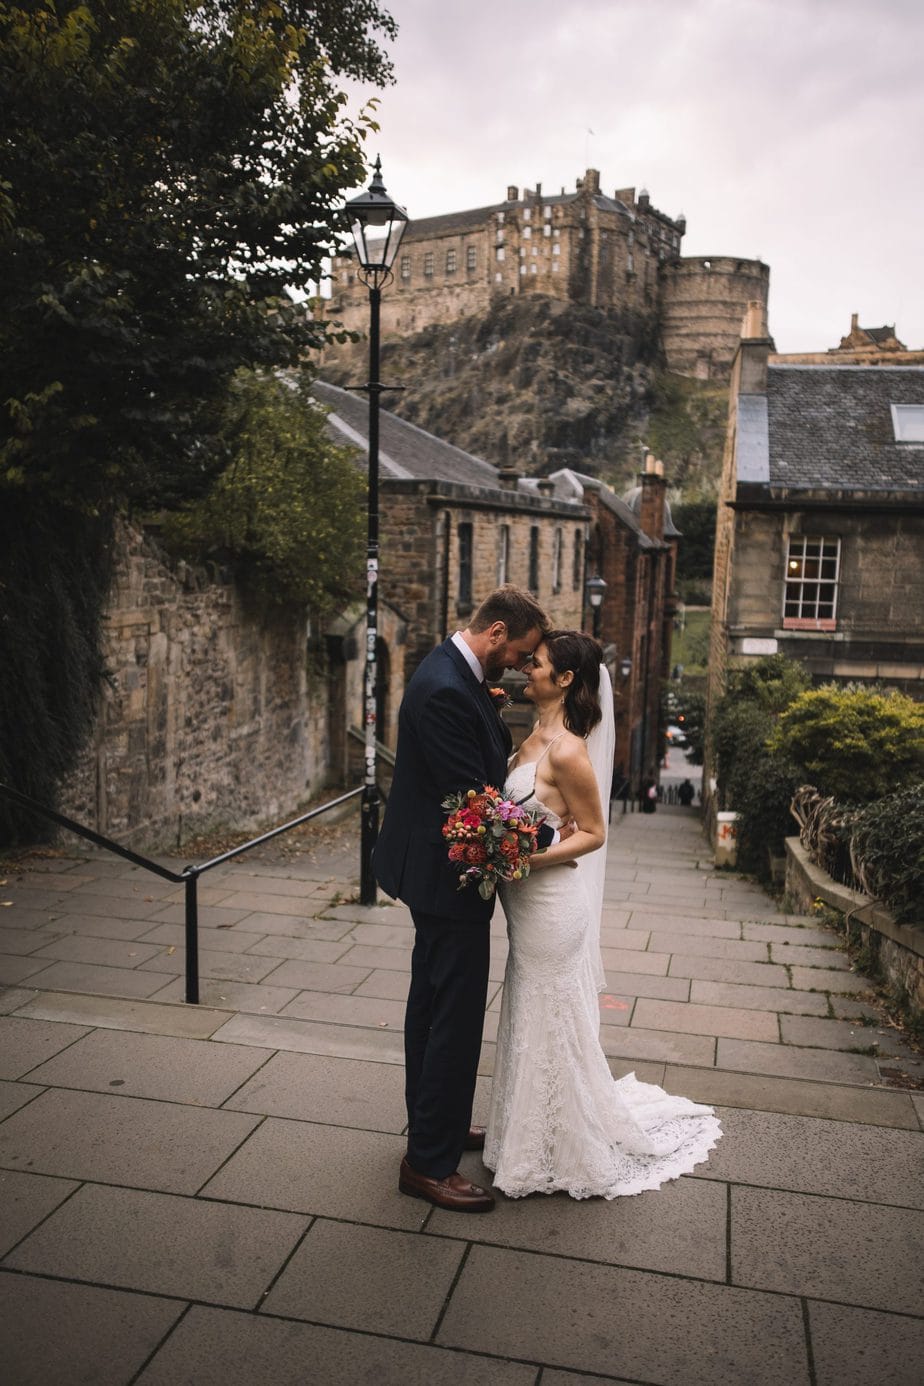 Bride and groom stood closely gazing at each other in front of Edinburgh castle during their Edinburgh elopement.